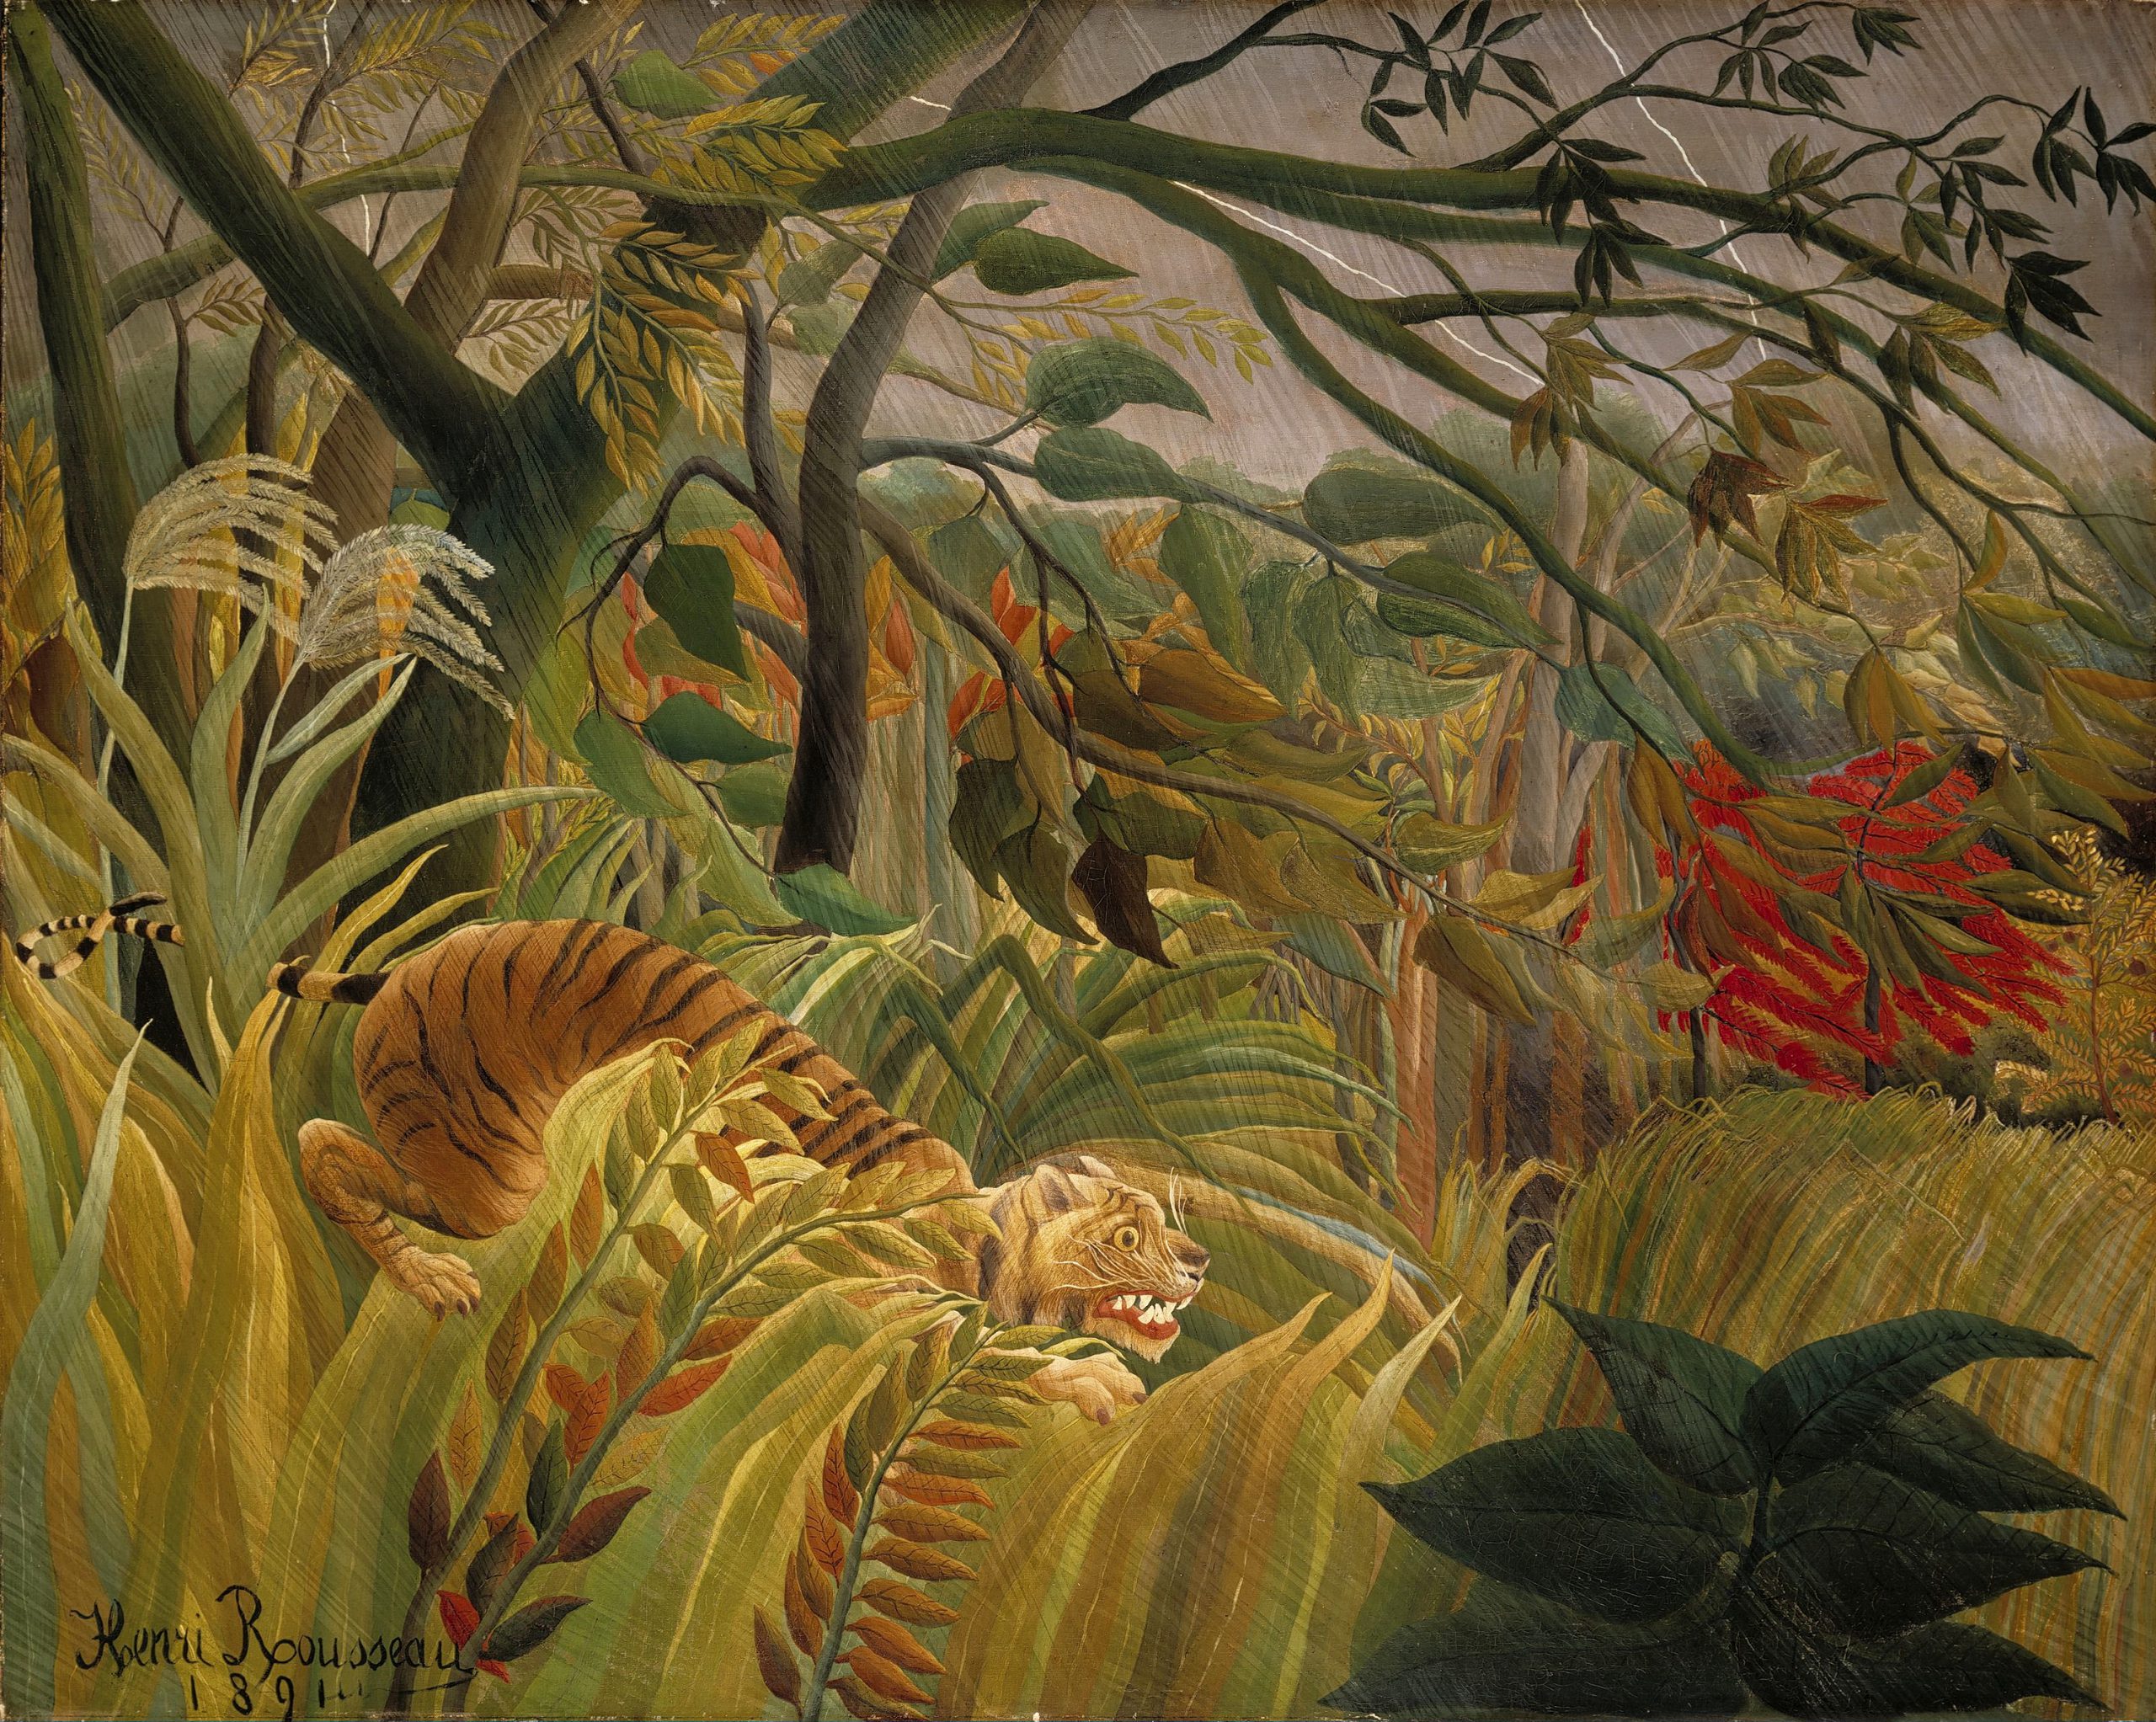 A painting by Henri Rousseau entitled Surprised!